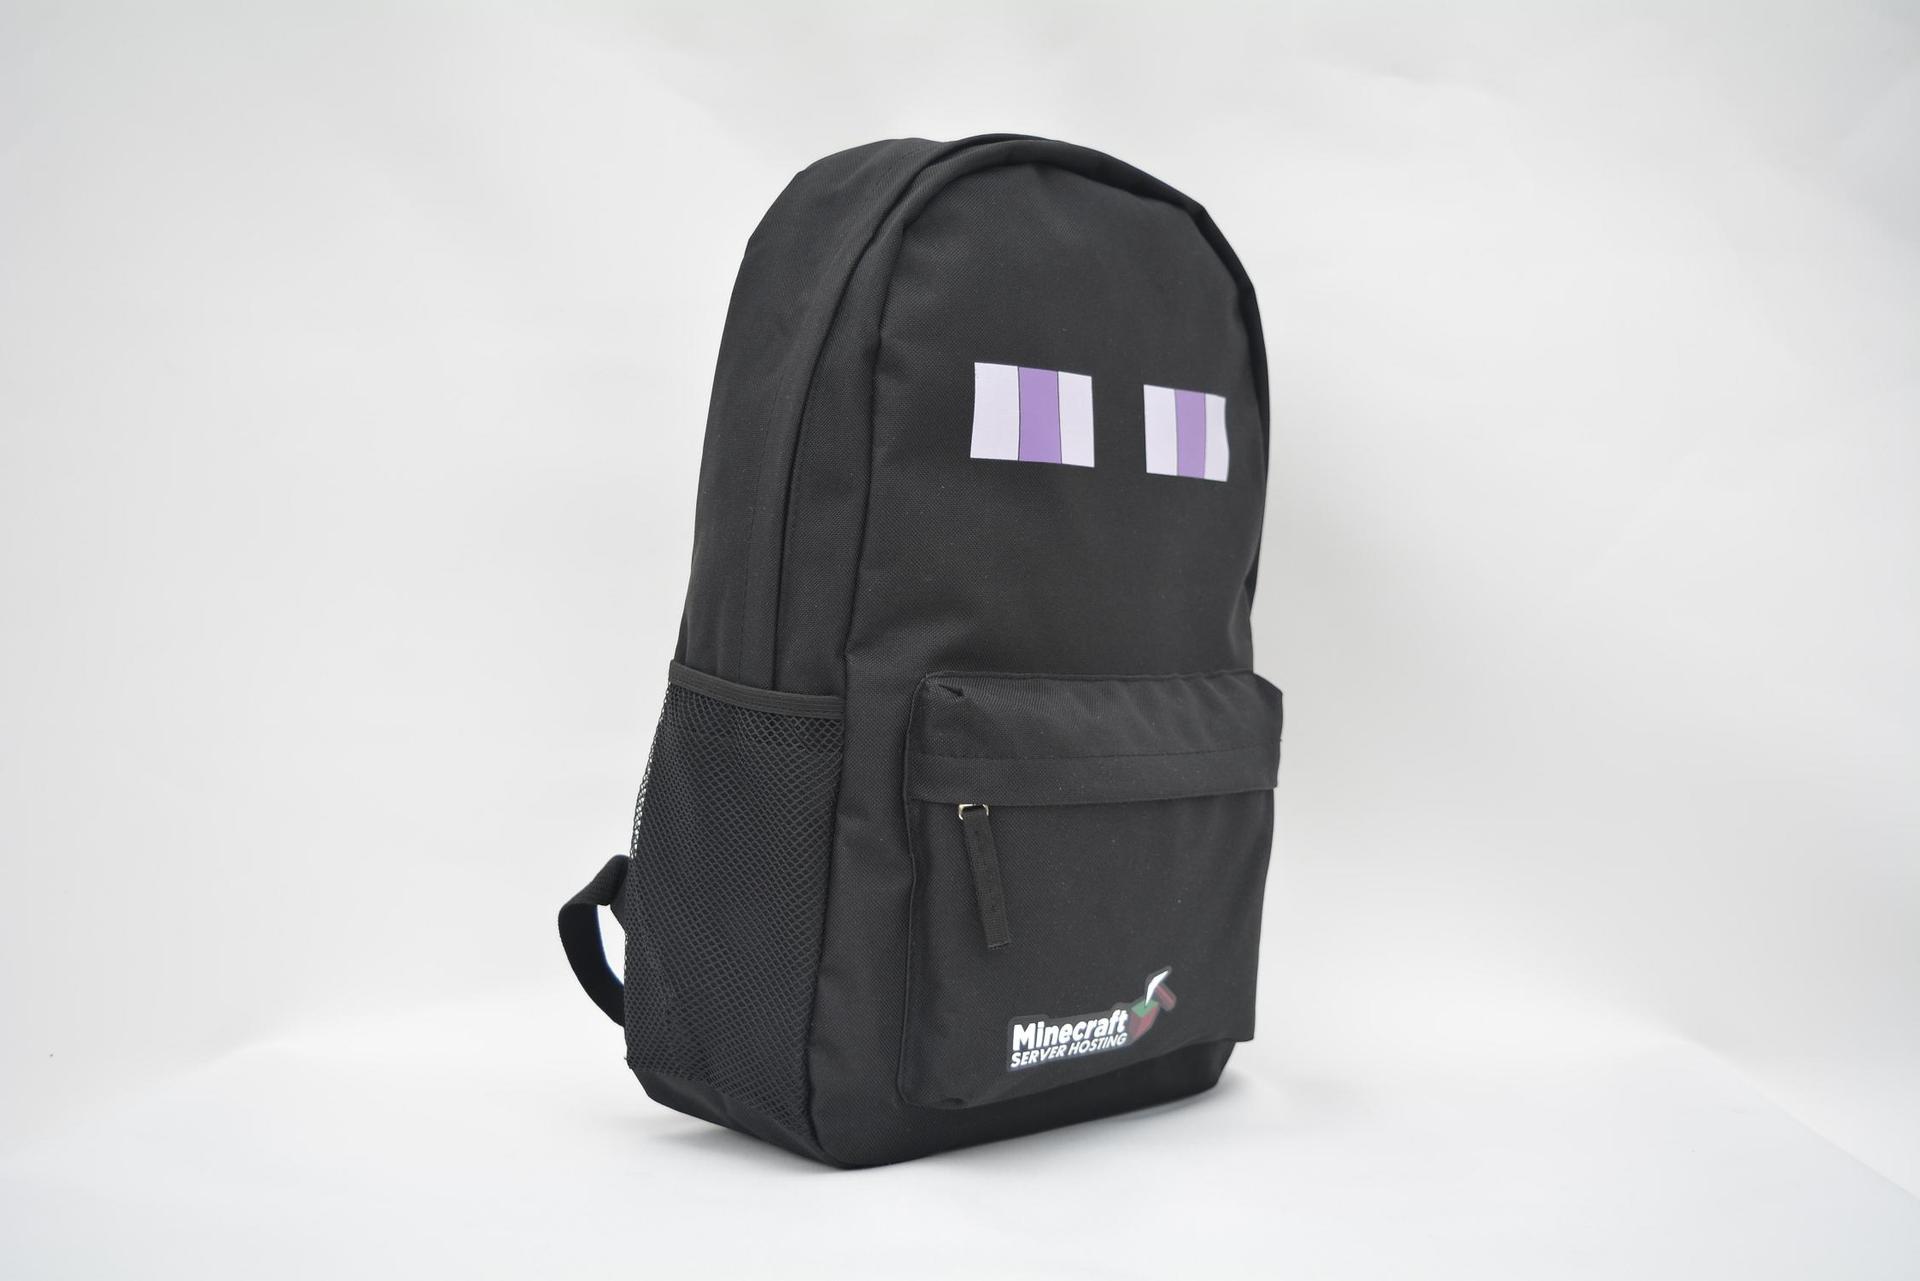 Minecraft anime backpack